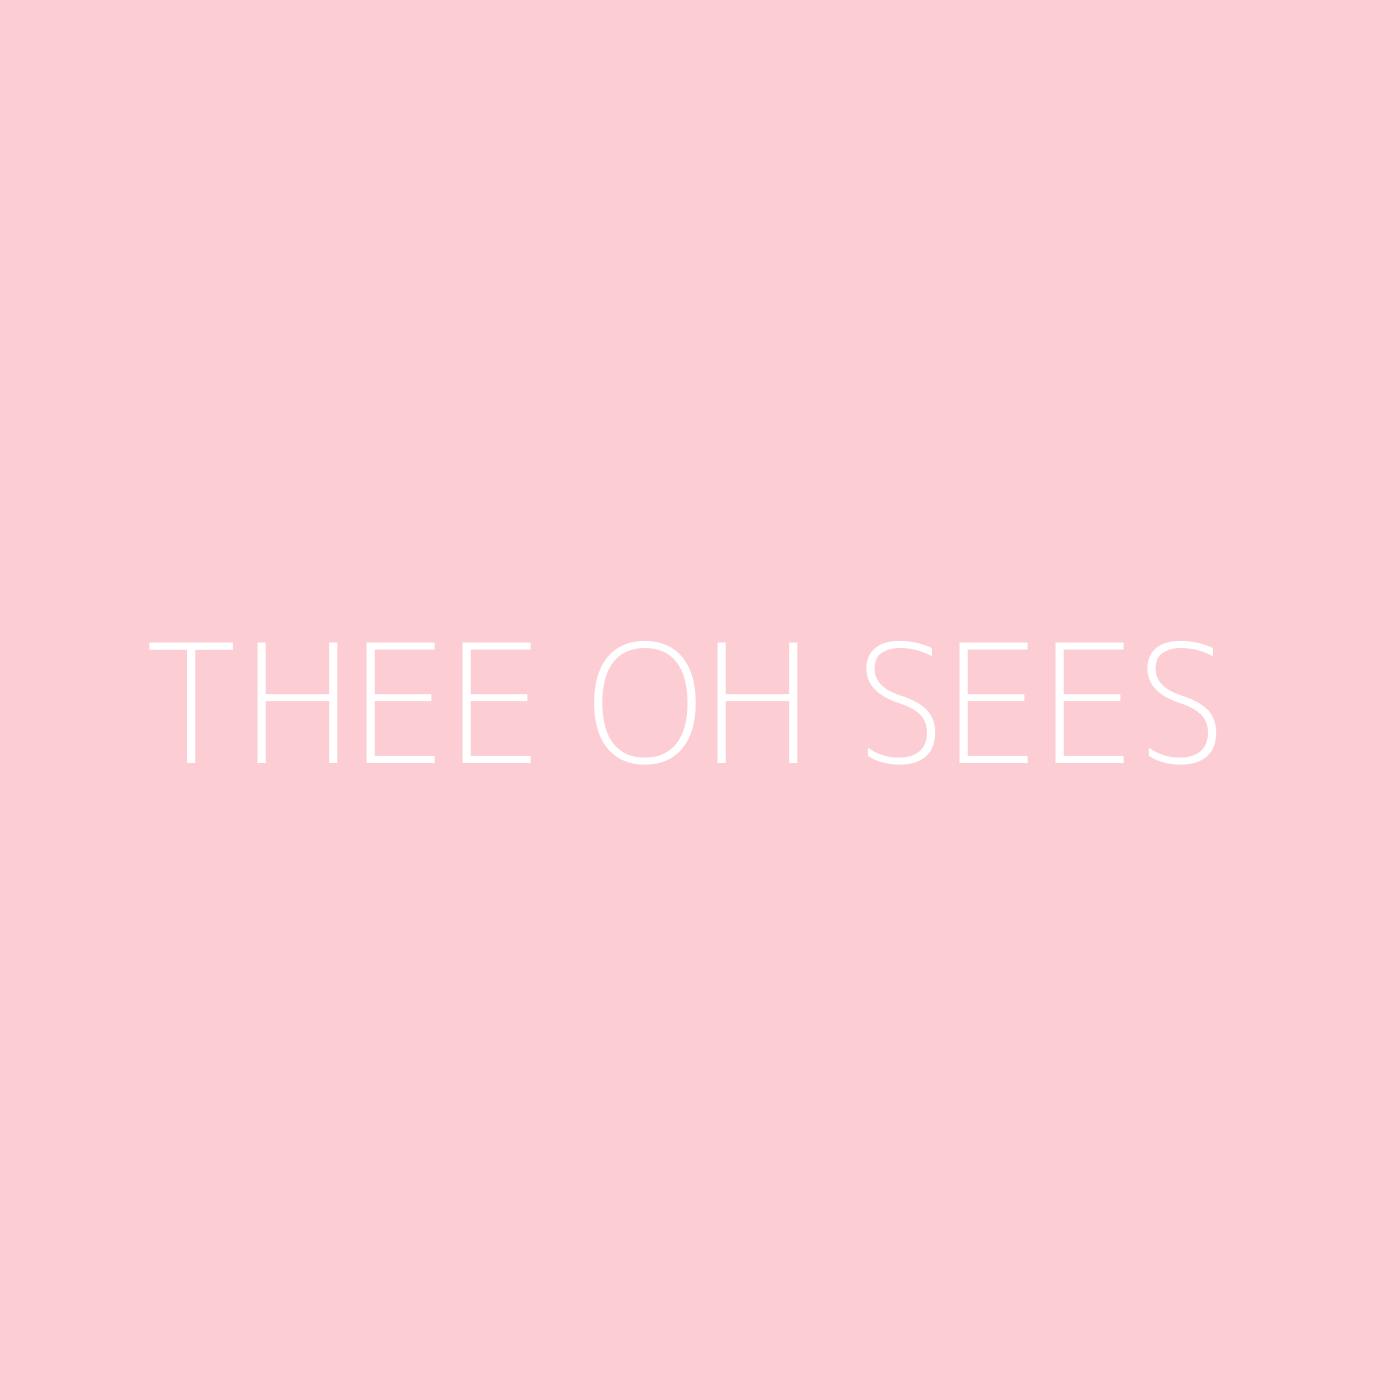 Thee Oh Sees Playlist Artwork